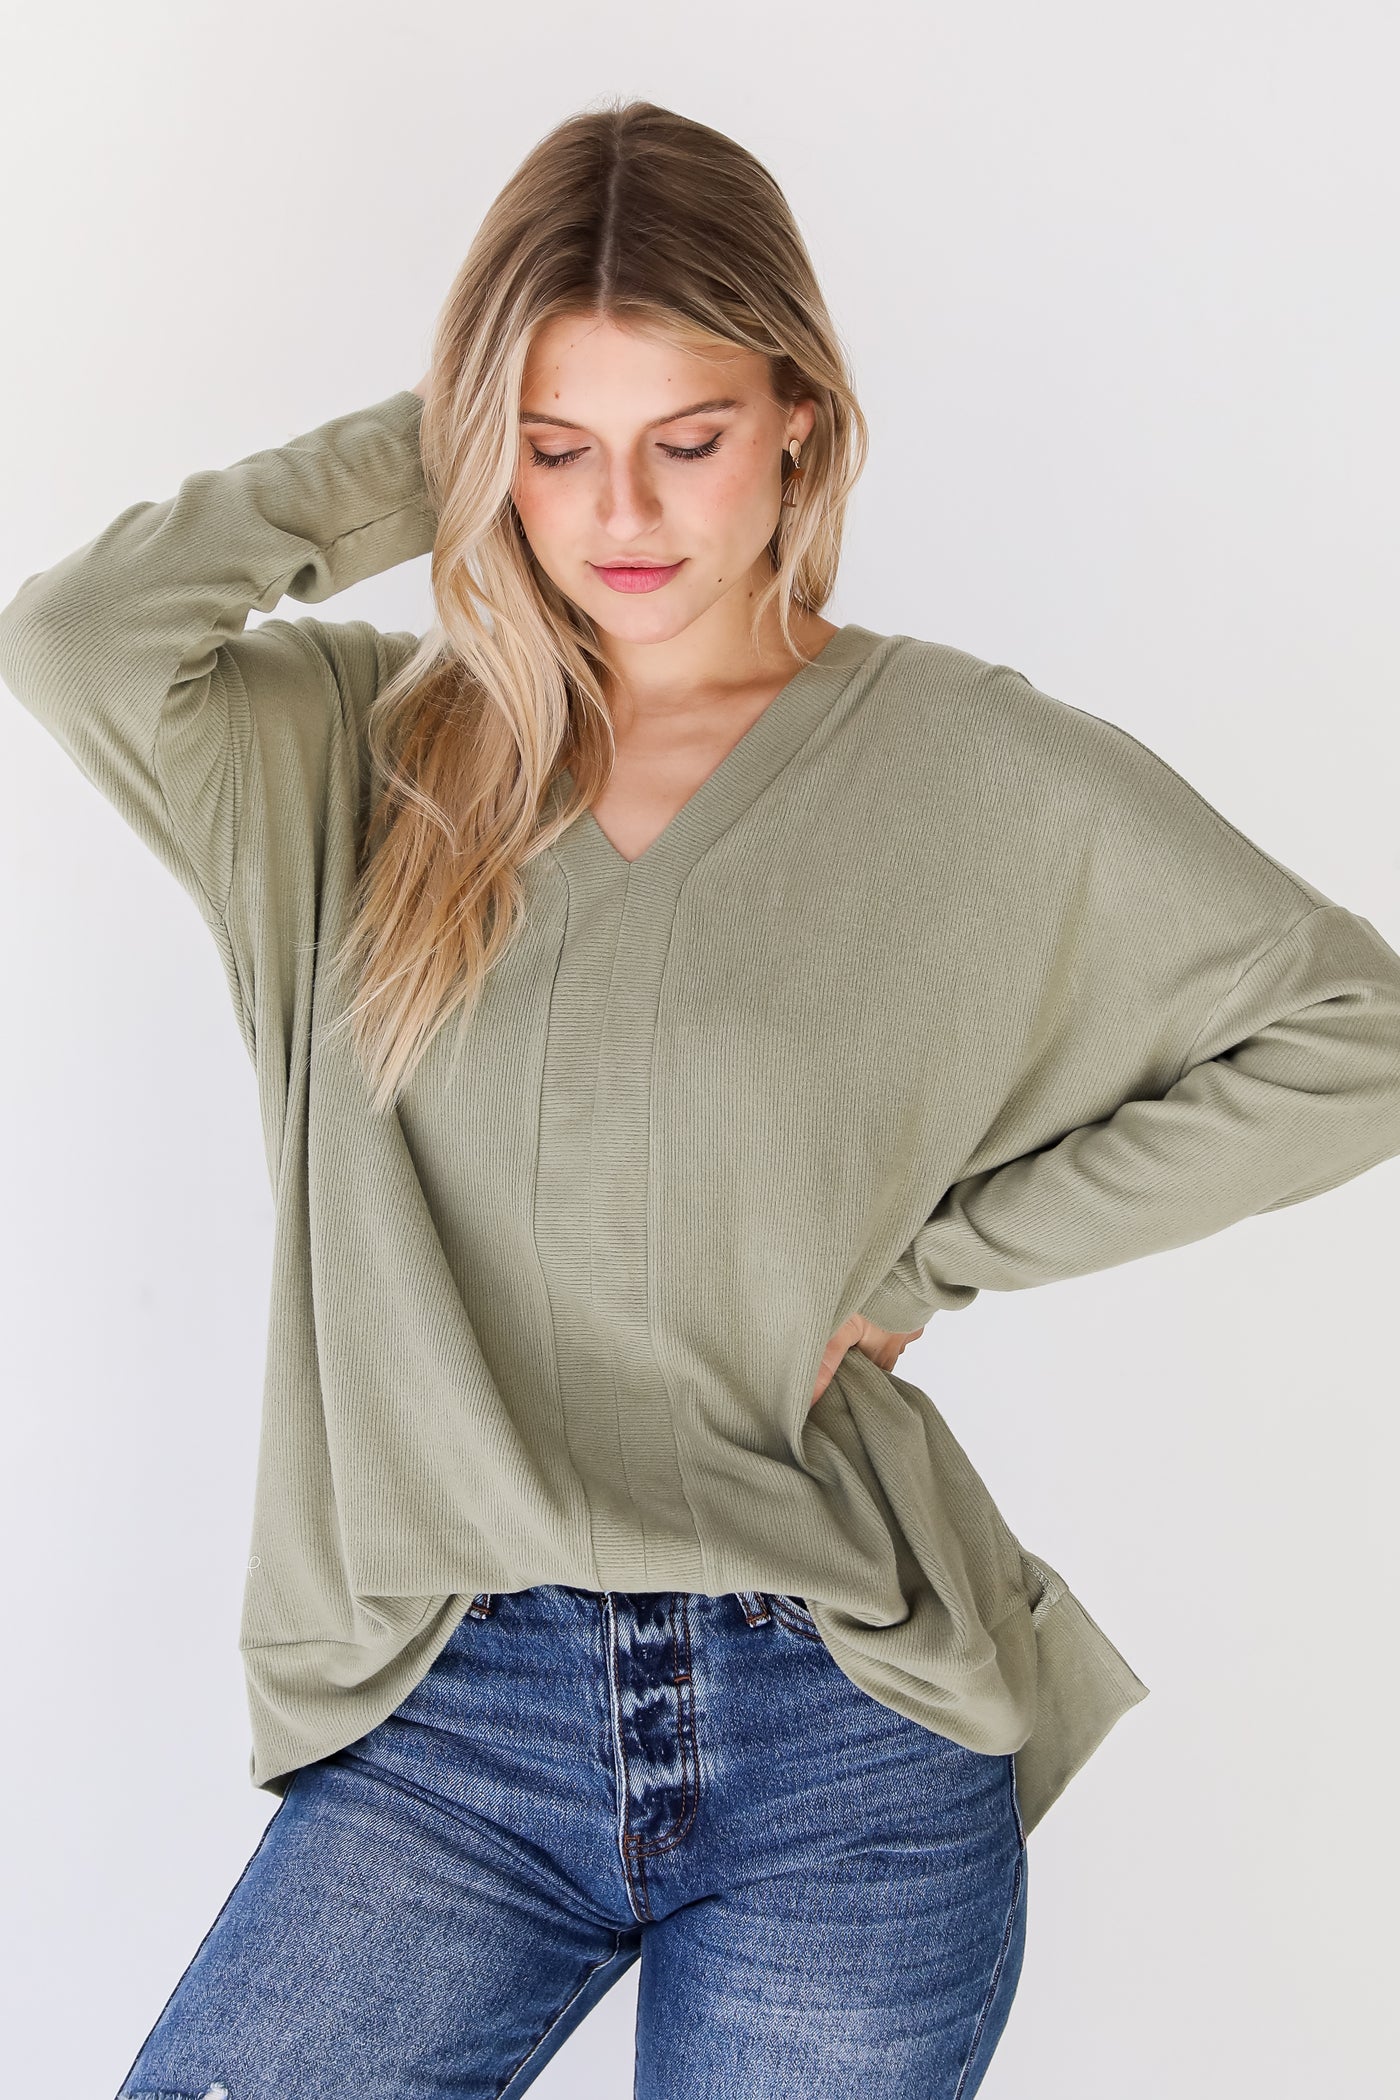 olive Brushed Knit Top front view